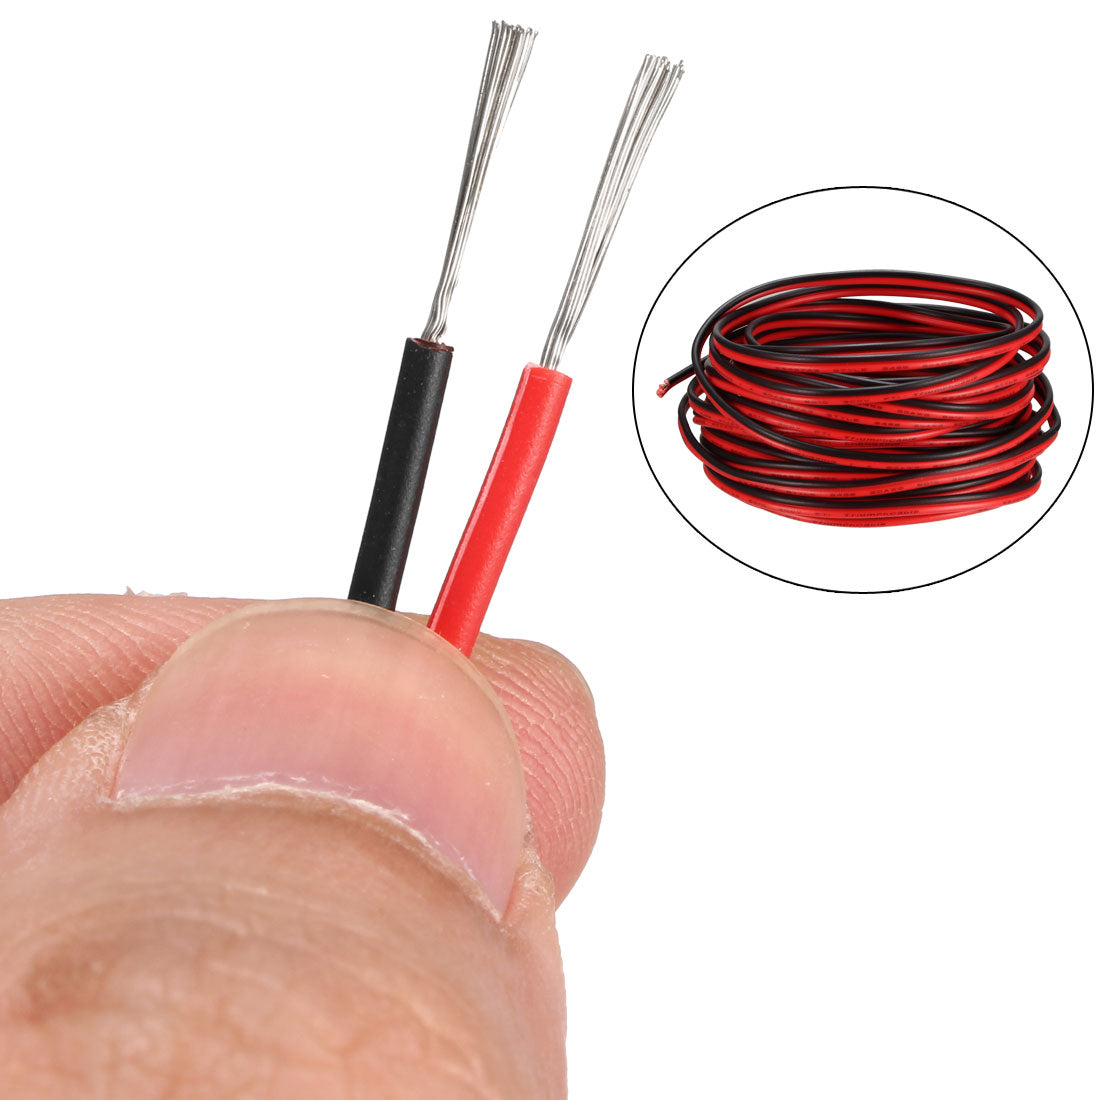 uxcell Uxcell Red Black Wire 2pin Extension Cable Cord 20 AWG Parallel Wire Tin Plated Copper 6M Length for LED Strip Light